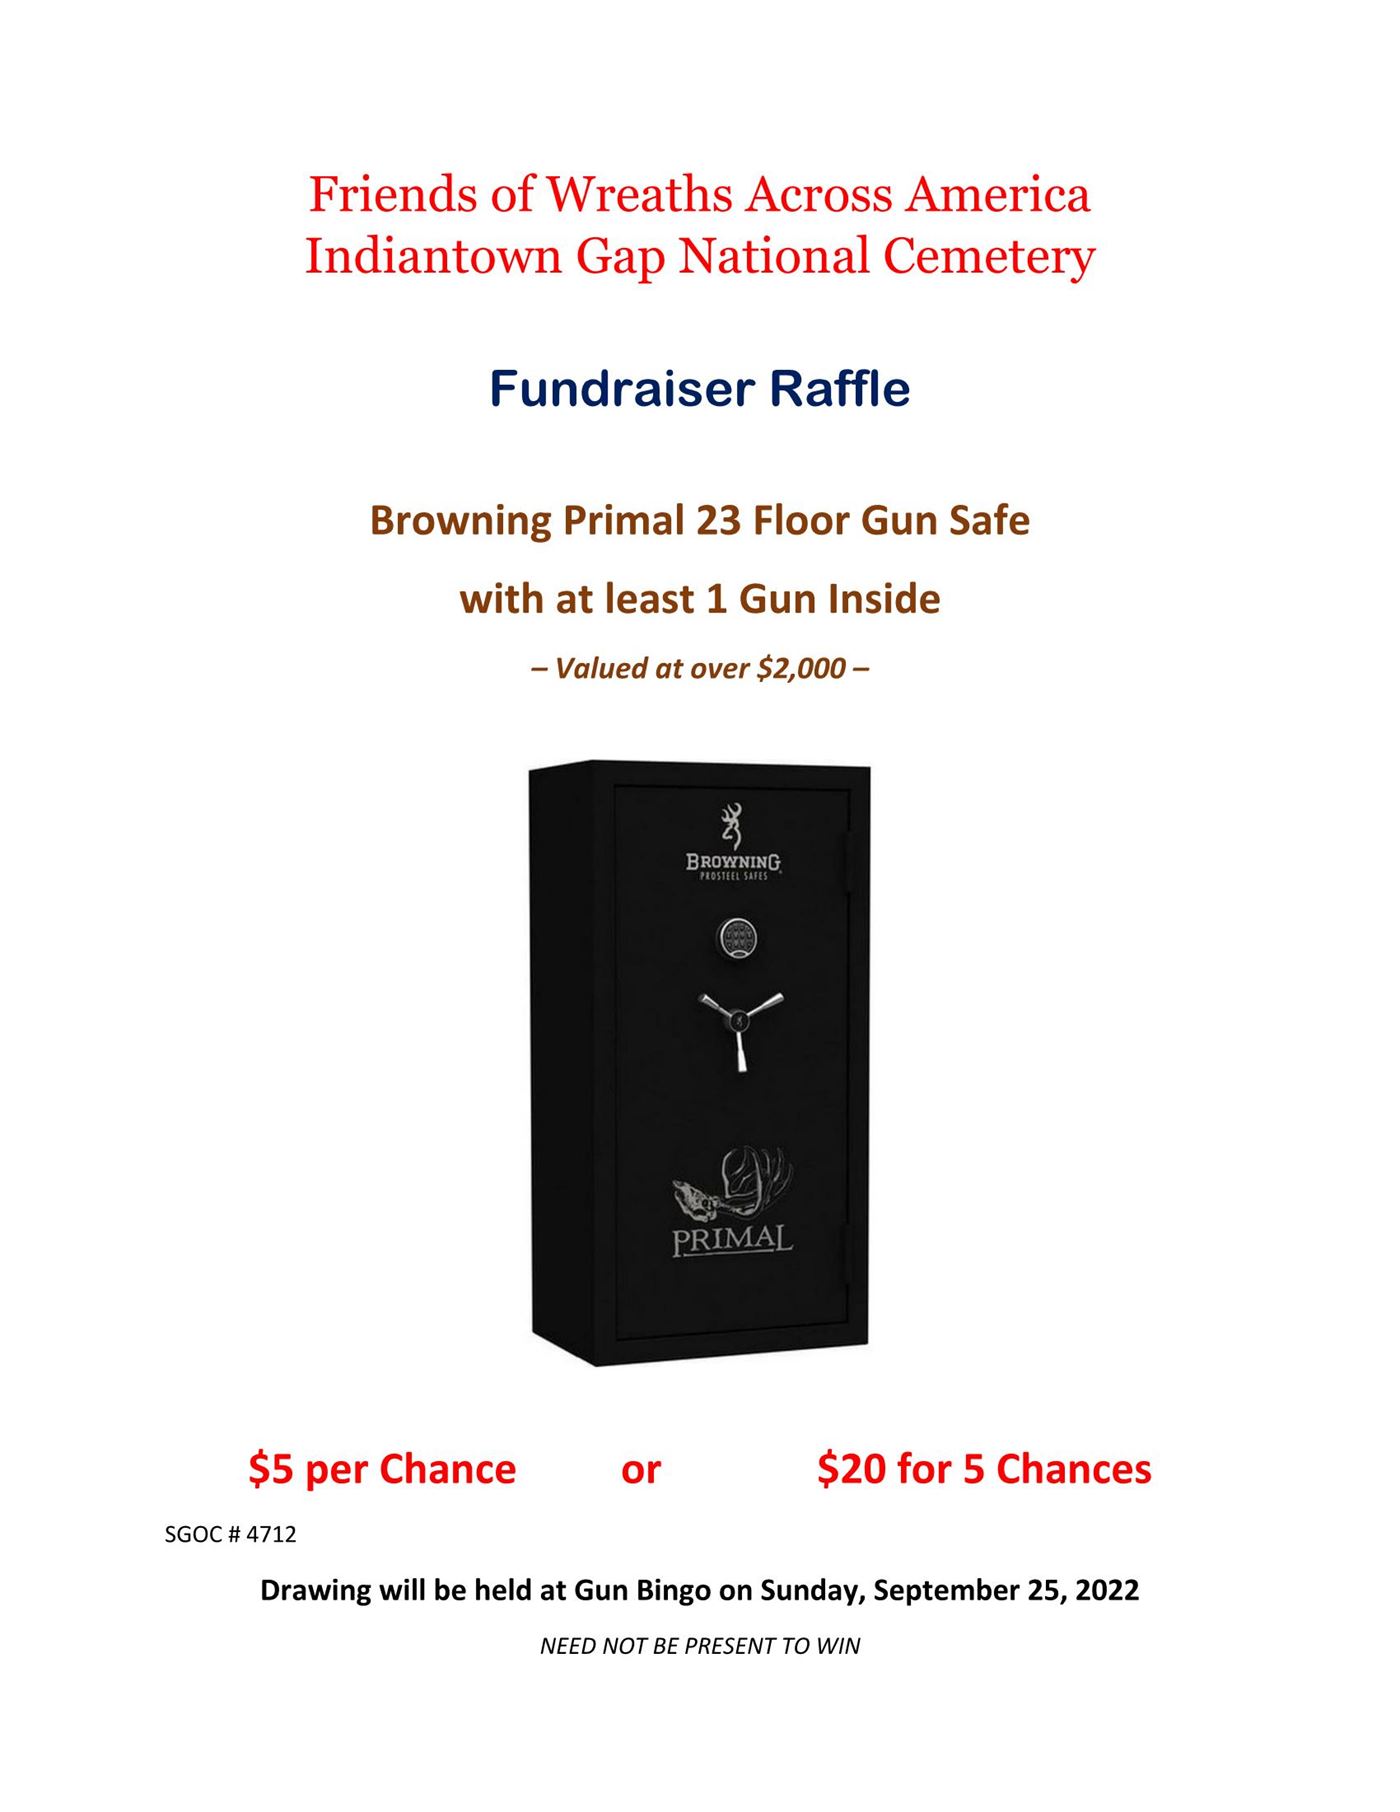 Take a chance on this full size Browing Primal 23 Floor safe with a surprise gun inside!    $5 per chance or $20 for 5 chances.  
To get your chances email info@waa-ignc.org